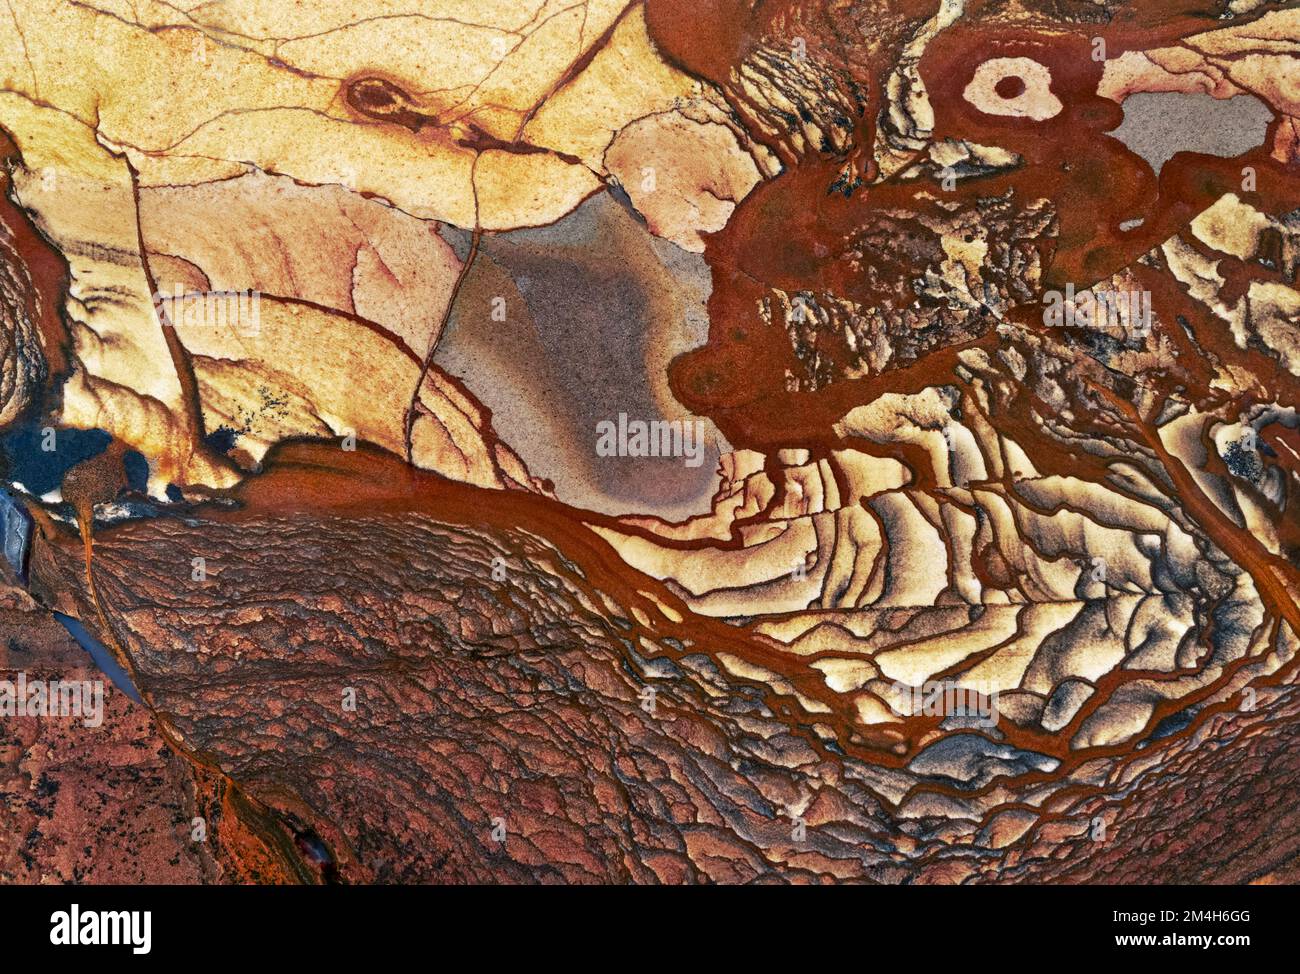 Backgrounds and textures: surface of beautiful brown and yellow decorative stone, natural abstract pattern of swirls, twirls, lines, cracks, spots and Stock Photo